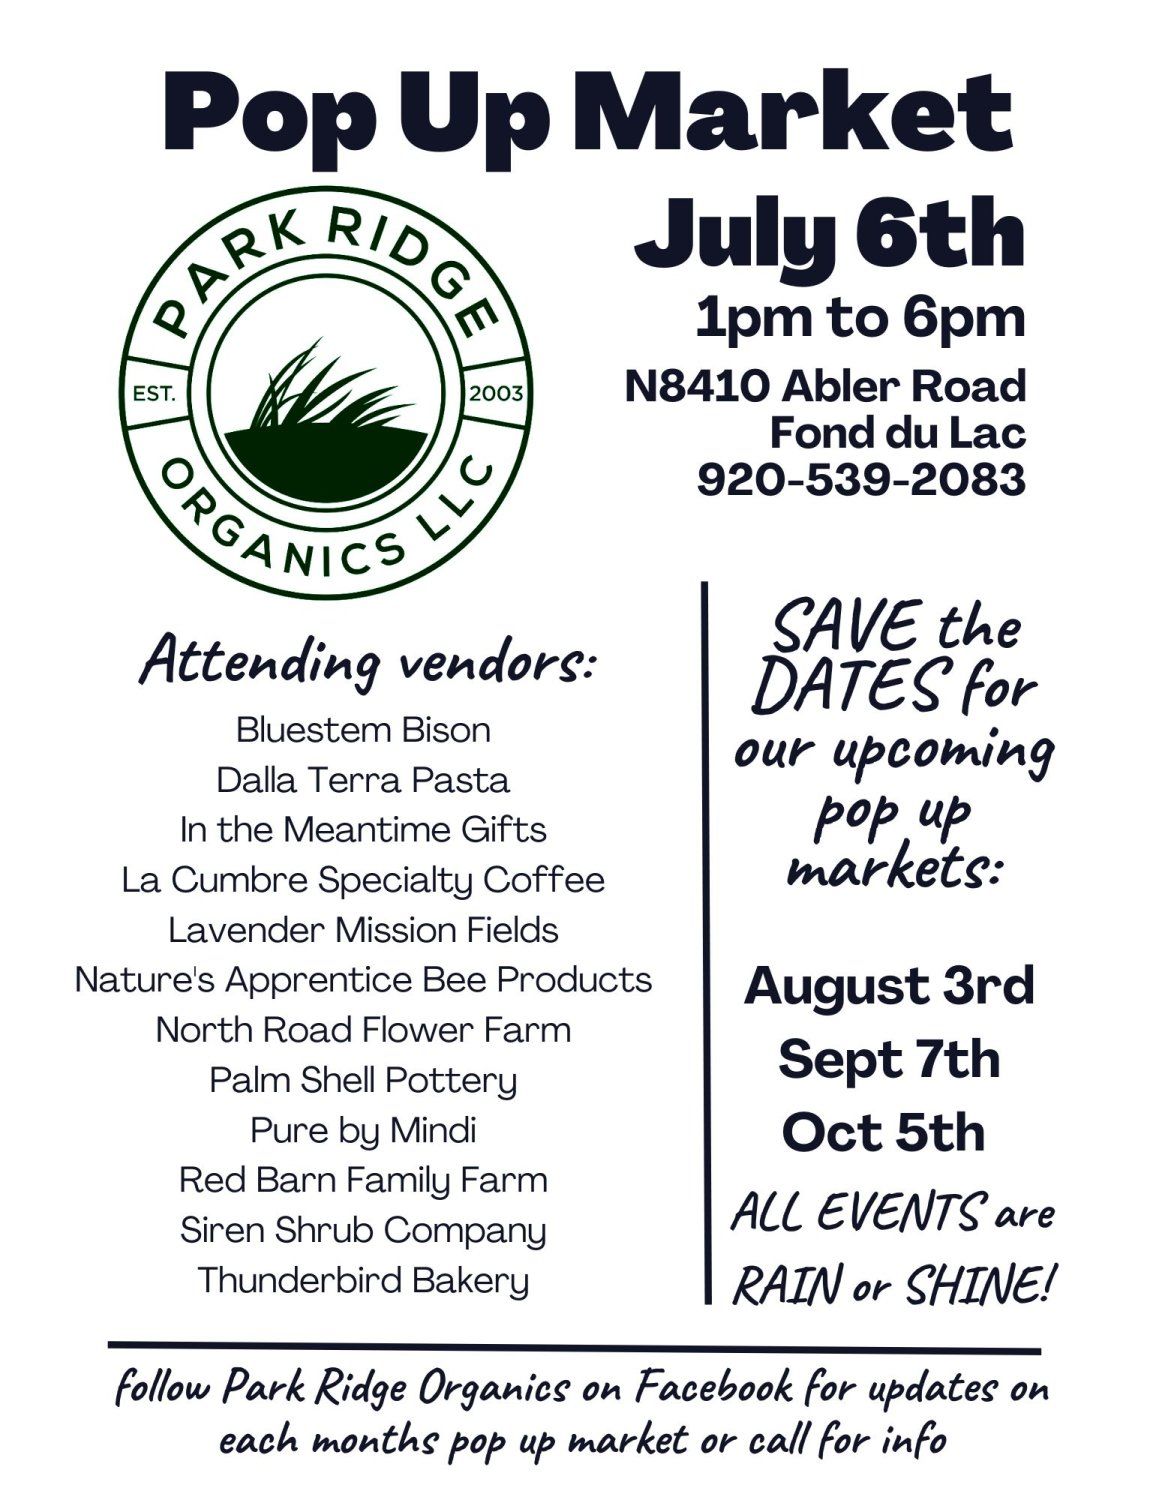 Next Happening: Pop Up Market July 6th at the Farm